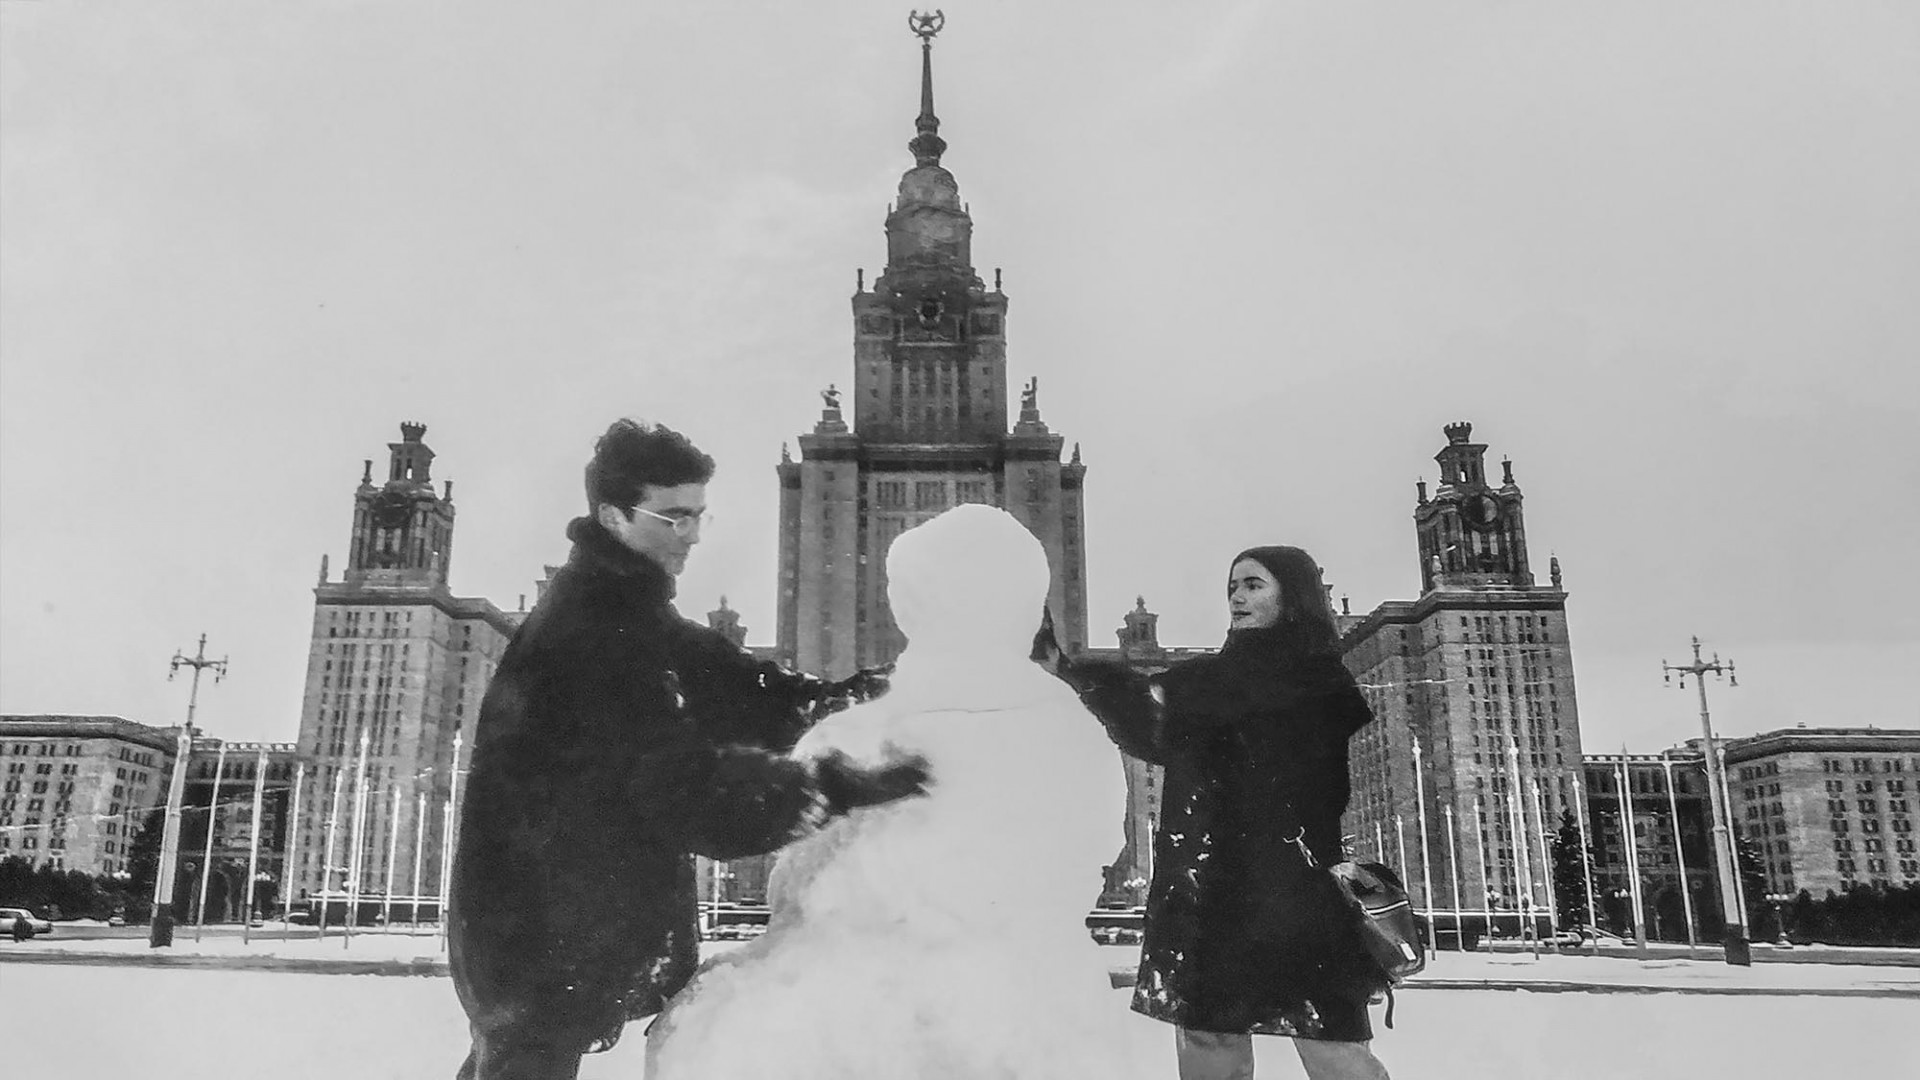 From the Archive: A Real Russian Winter From the 90s - The Moscow Times